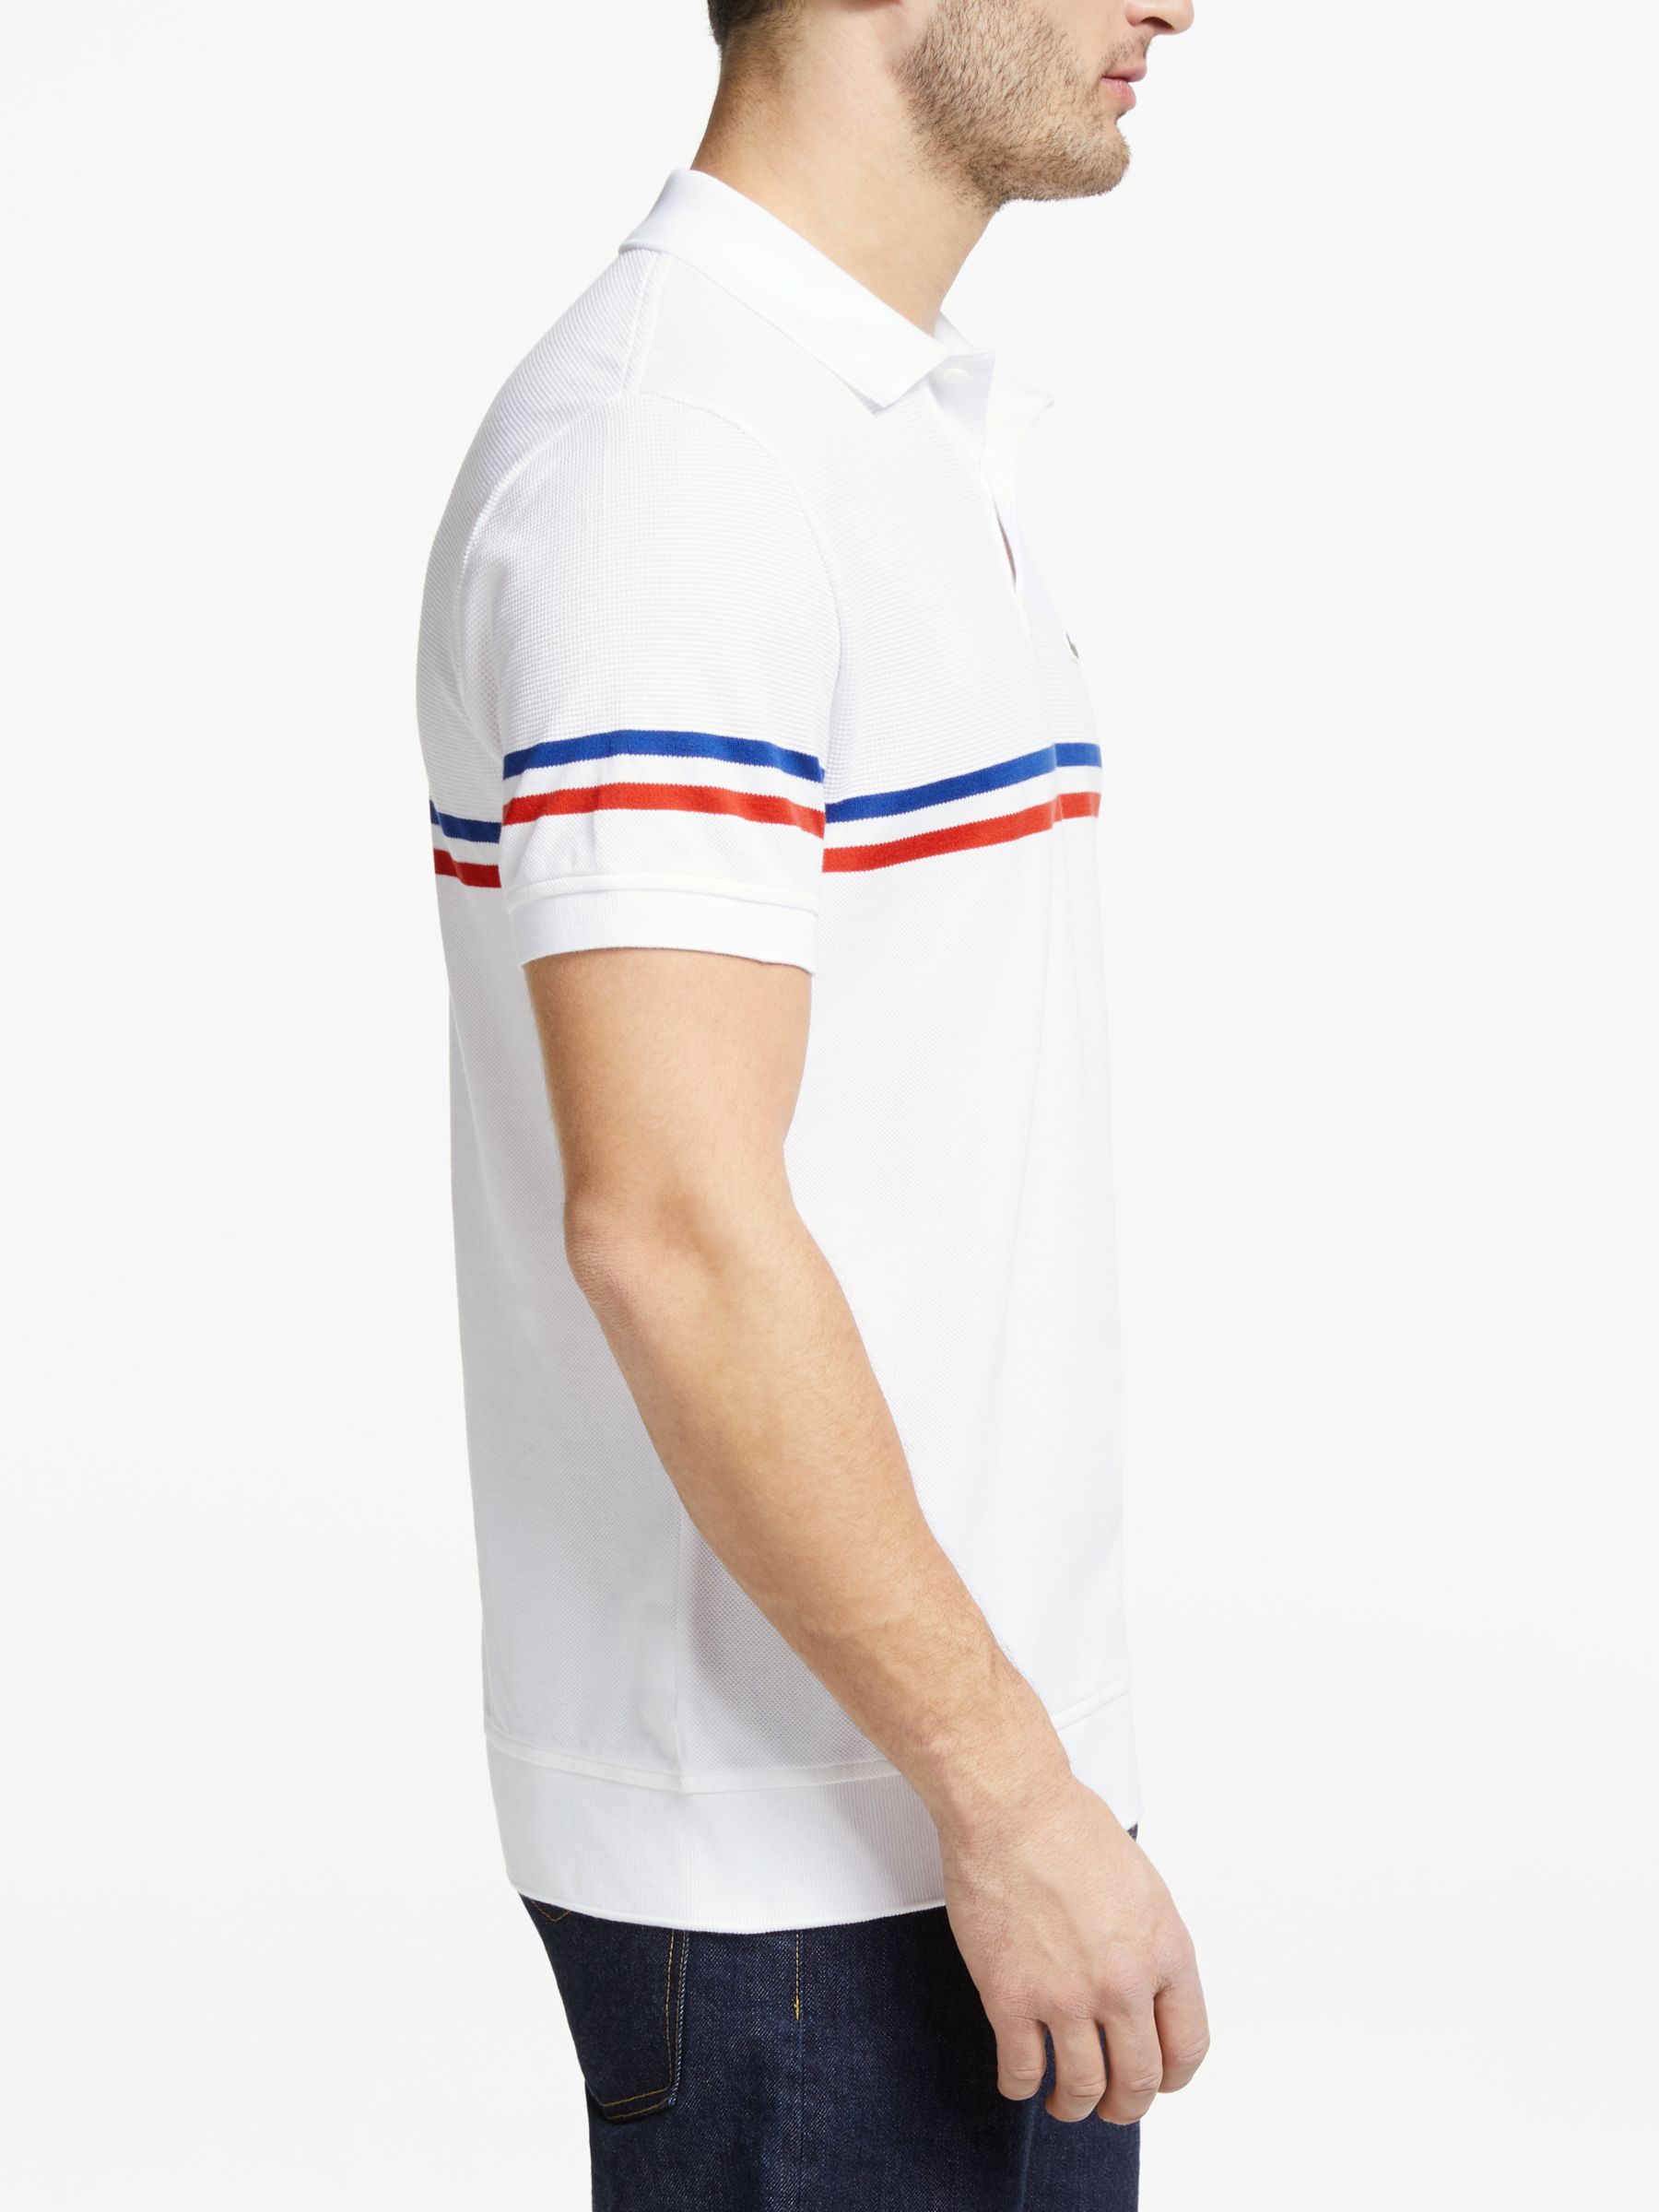 lacoste france online store